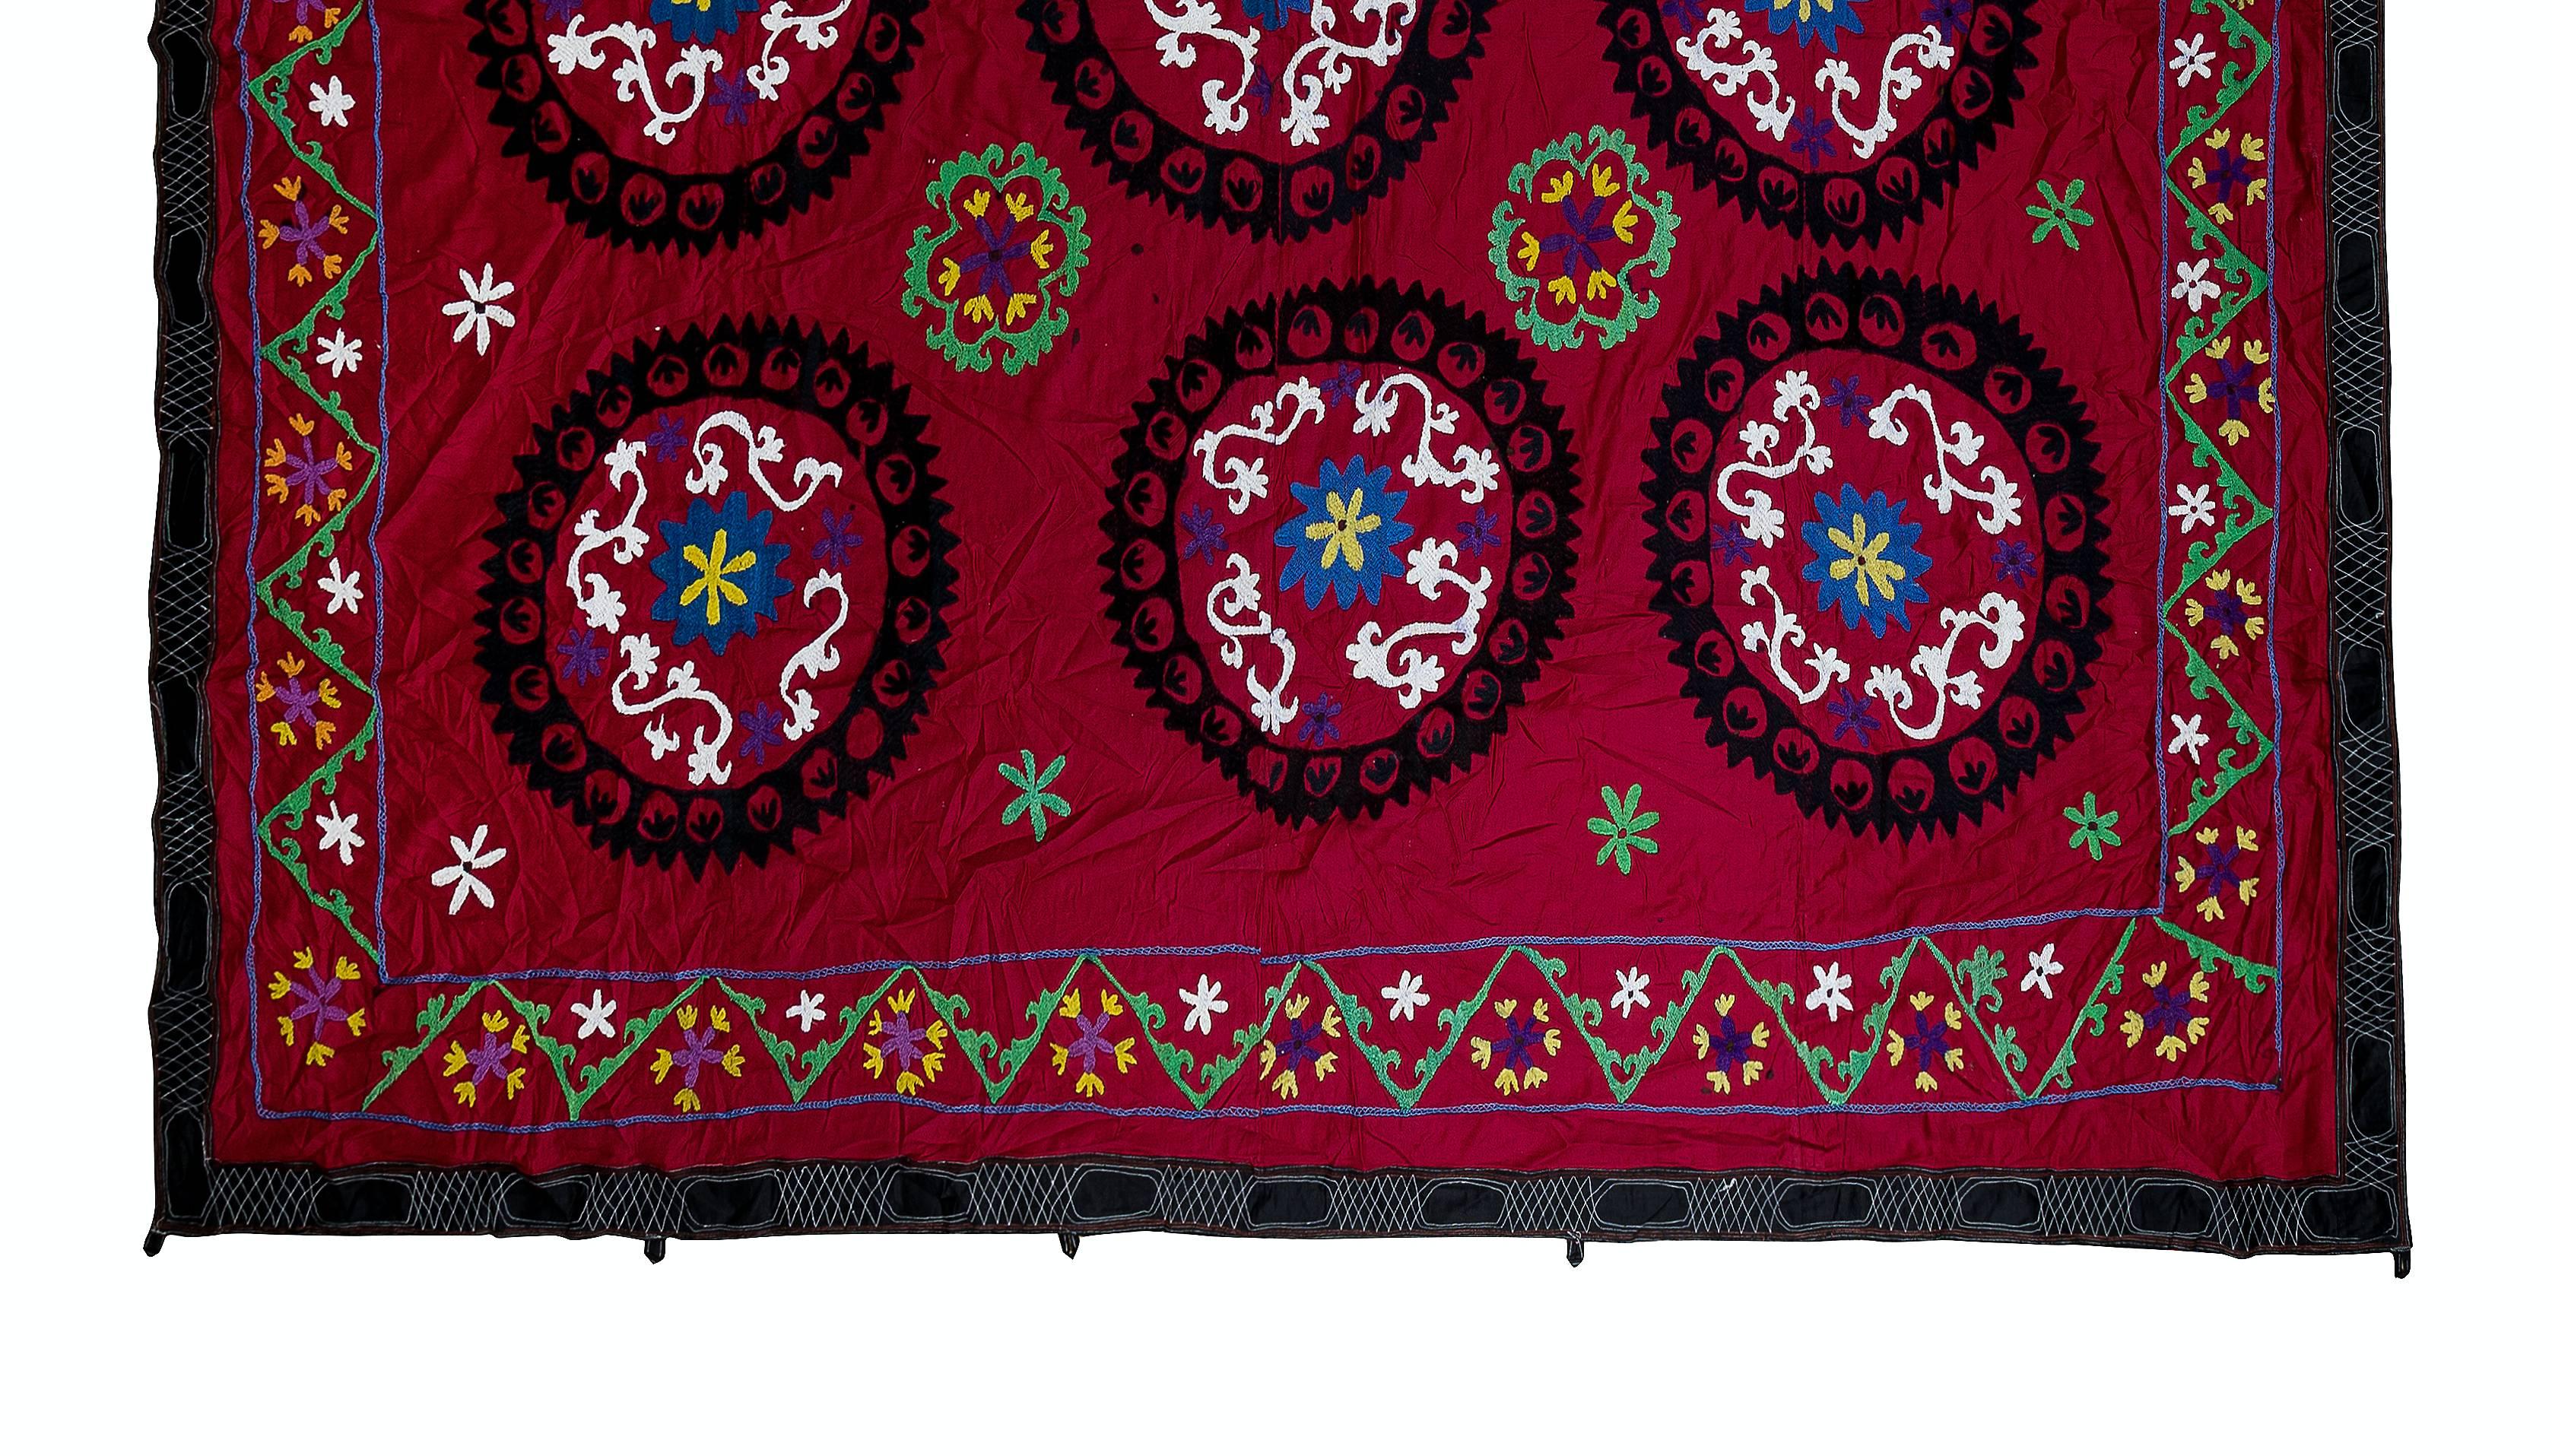 Uzbek 8.3x8.3 Ft Vintage Silk Embroidery Bedspread, Central Asian Suzani Bed Cover For Sale